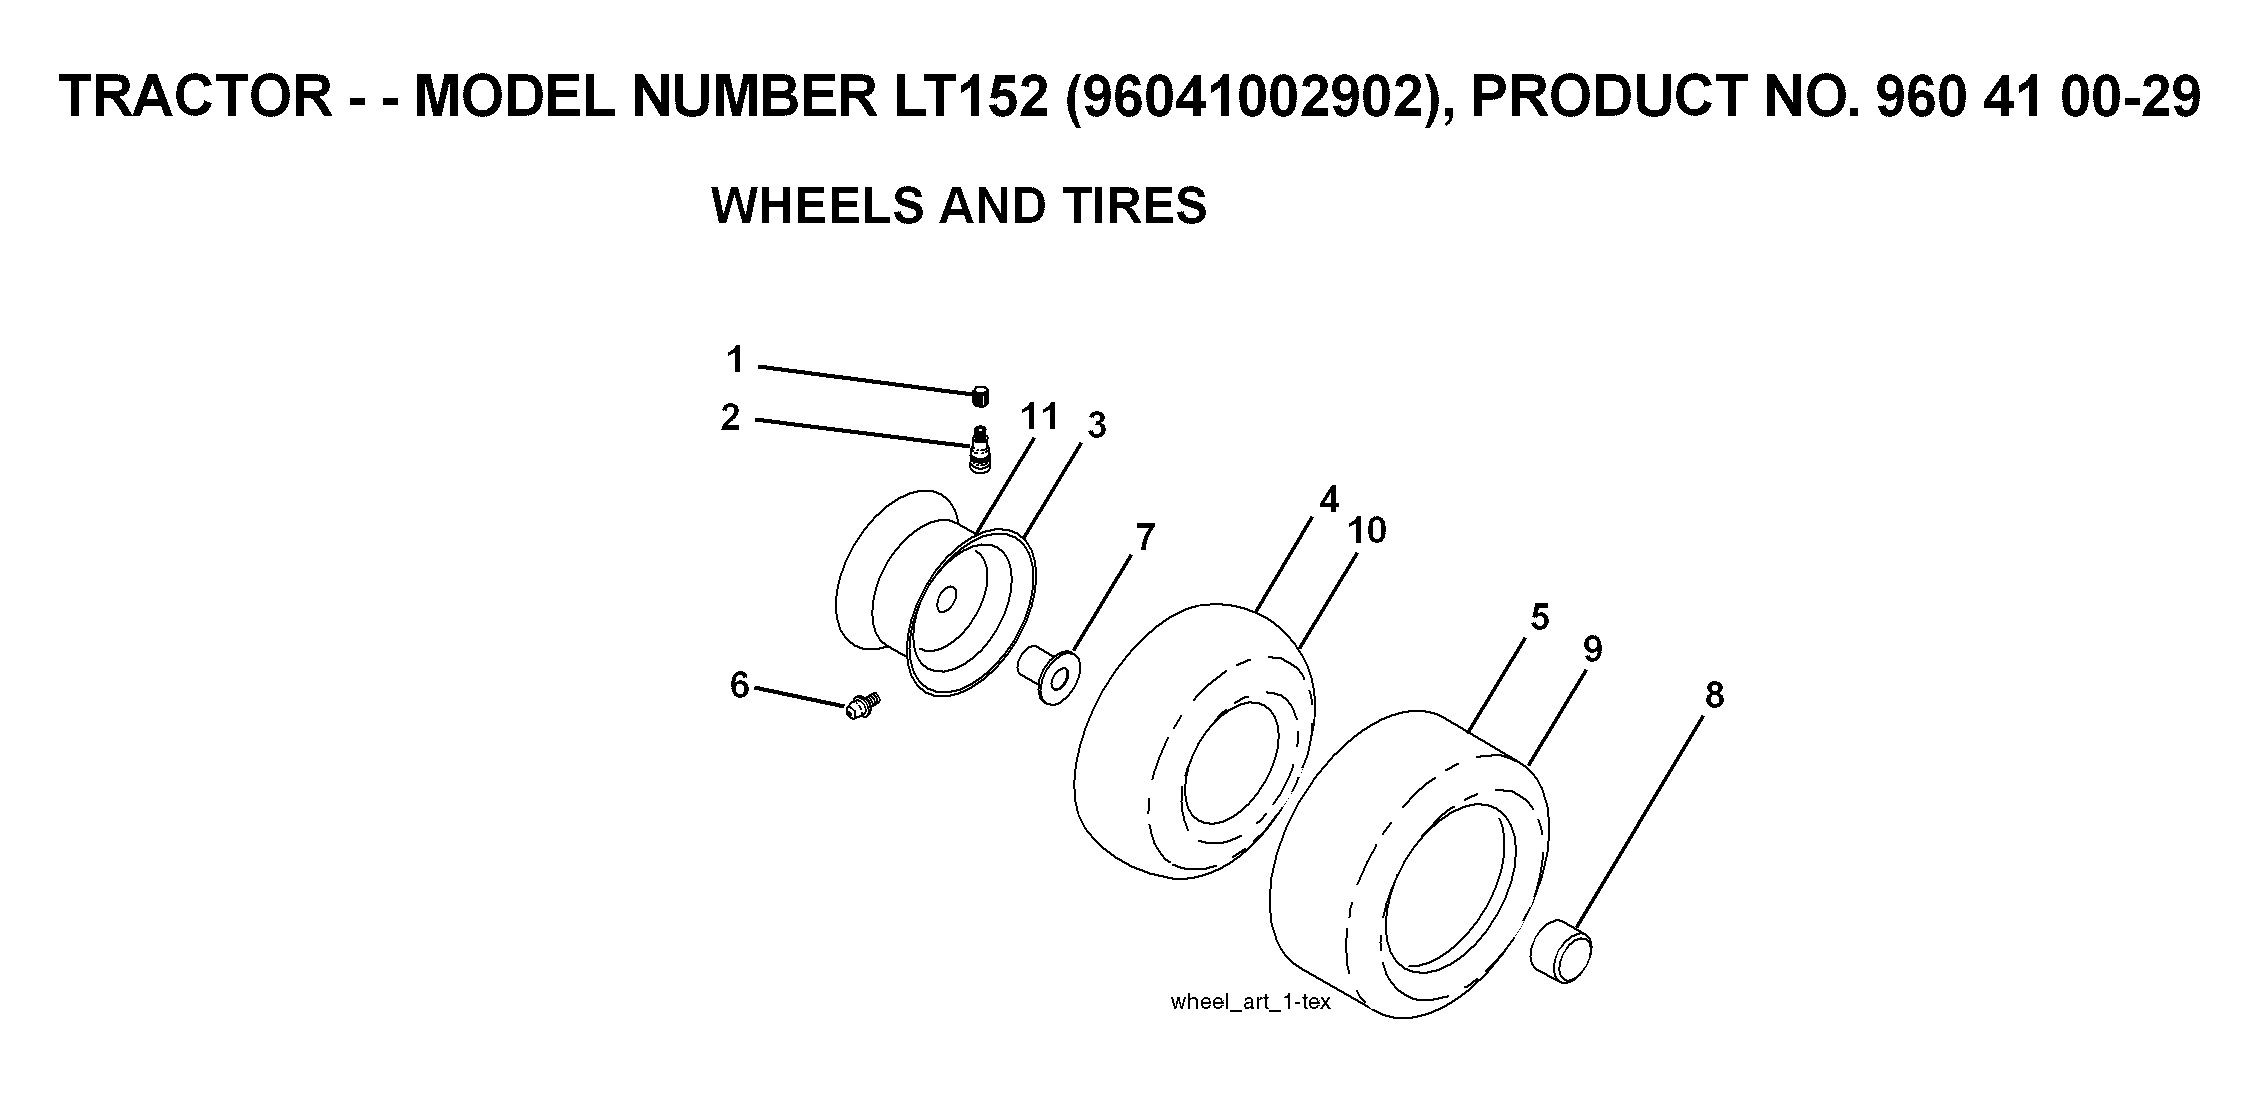 Wheels and tires 532059192, 532065139, 532106732, 532059904, 532122073, 532000278, 532009040, 532104757, 532420531, 532007152, 532106108, 576707201